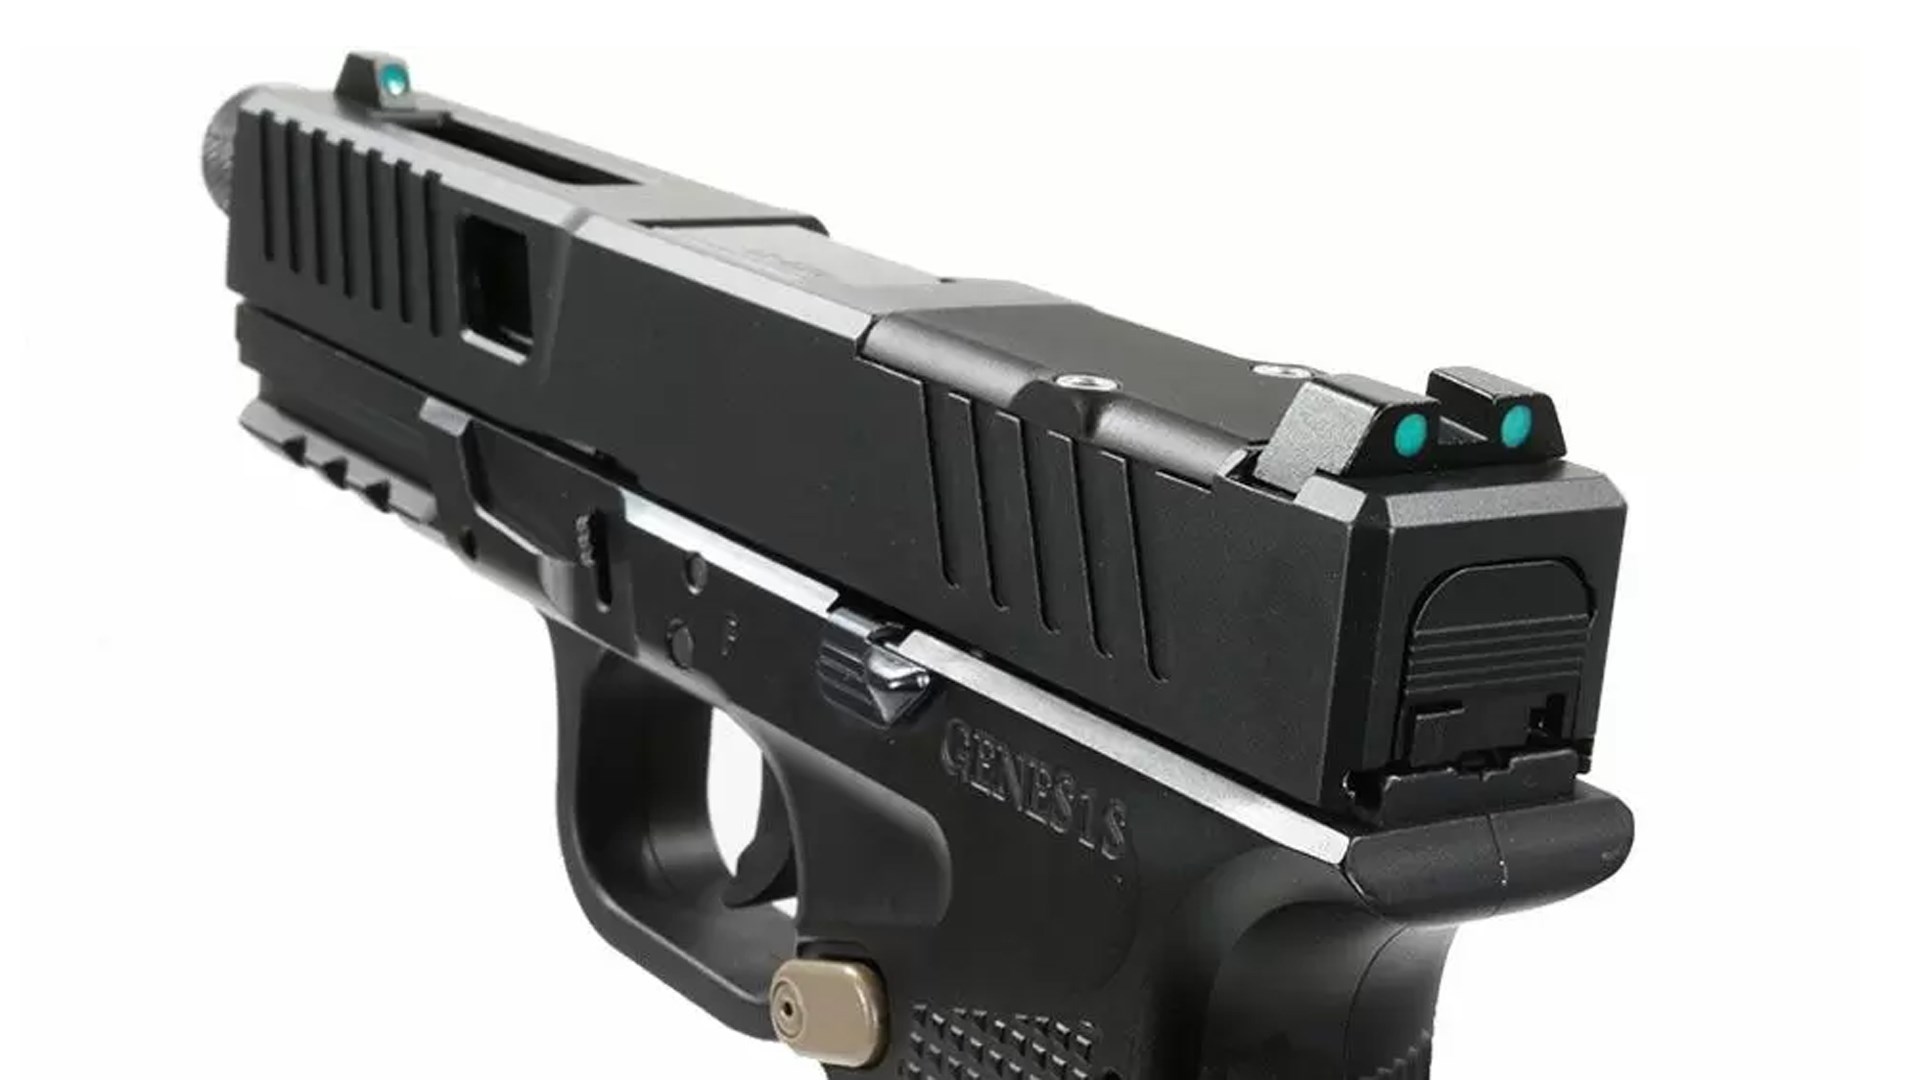 Detail of the black slide on the Bear Creek Arsenal Genes1s II pistol, showing the three-dot sights and optic-ready slide.